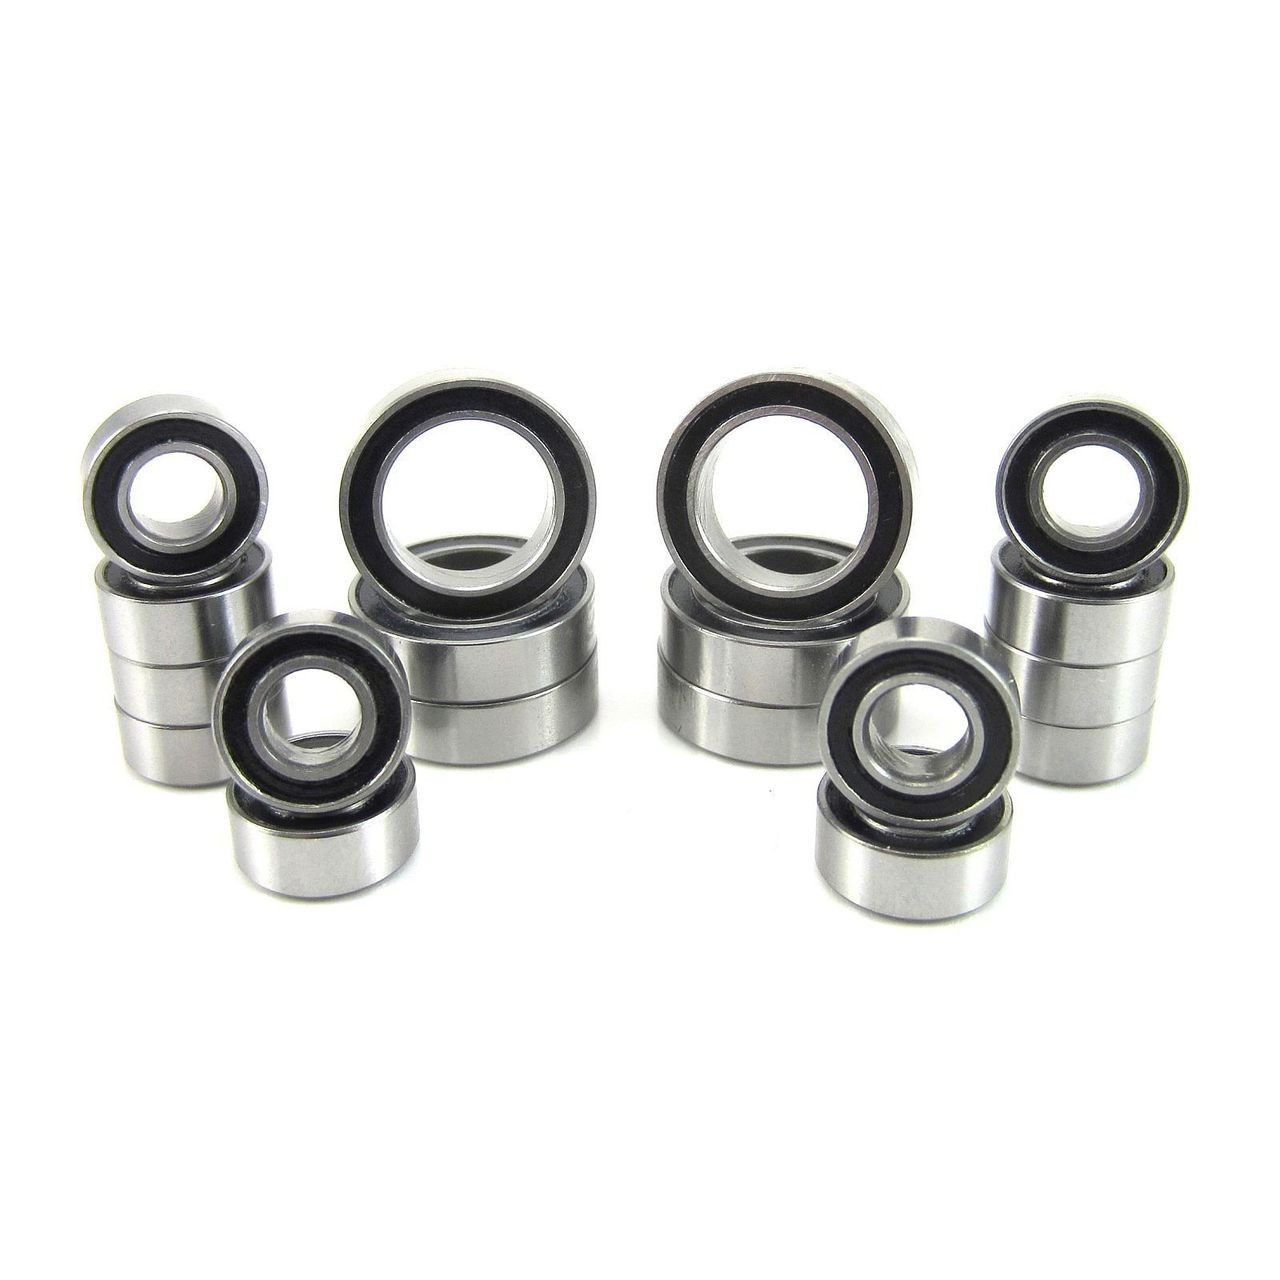 TRB RC Precision Ball Bearing Kit (18) Rubber Sealed HPI WR8 Flux